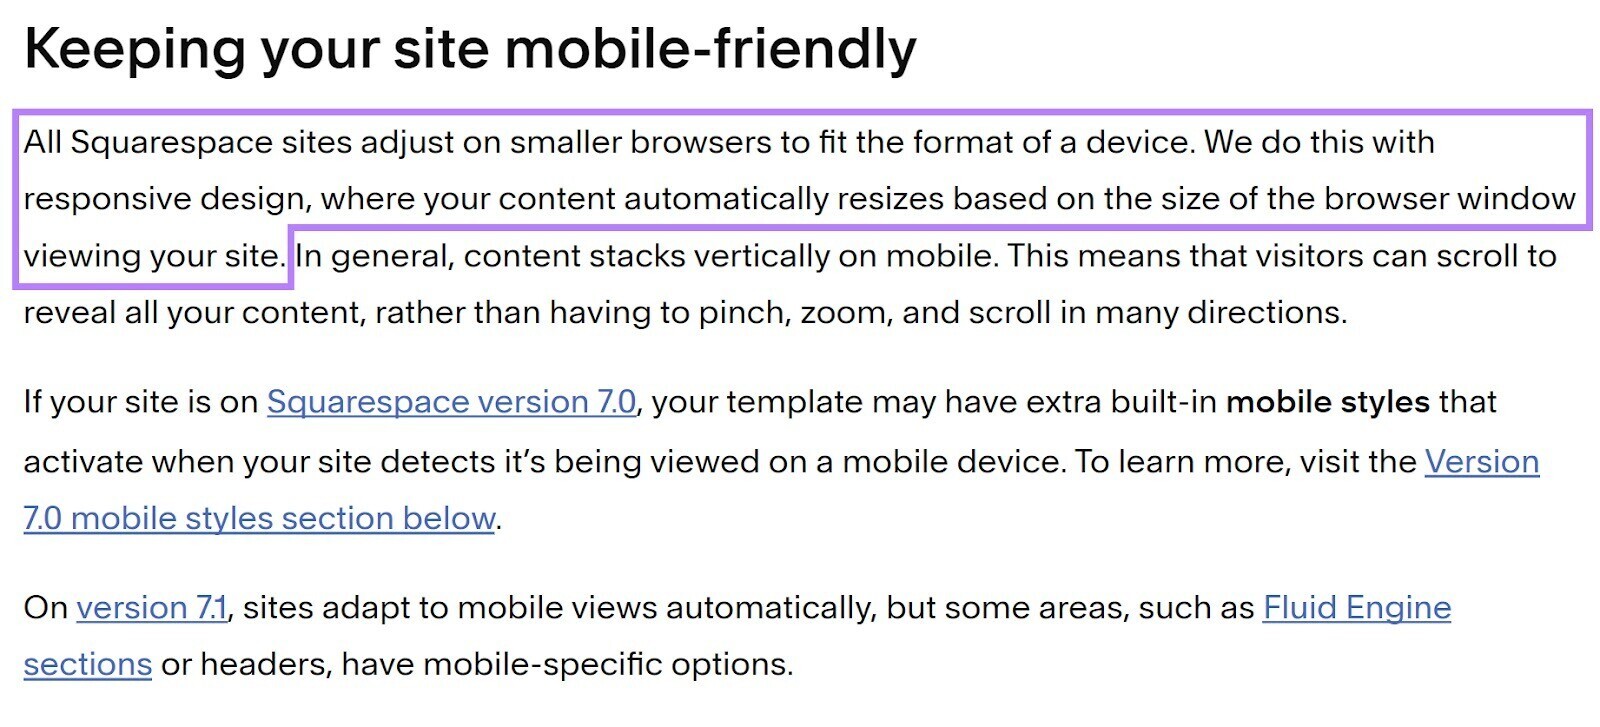 Squarespace's "keeping your site mobile-friendly" explanation